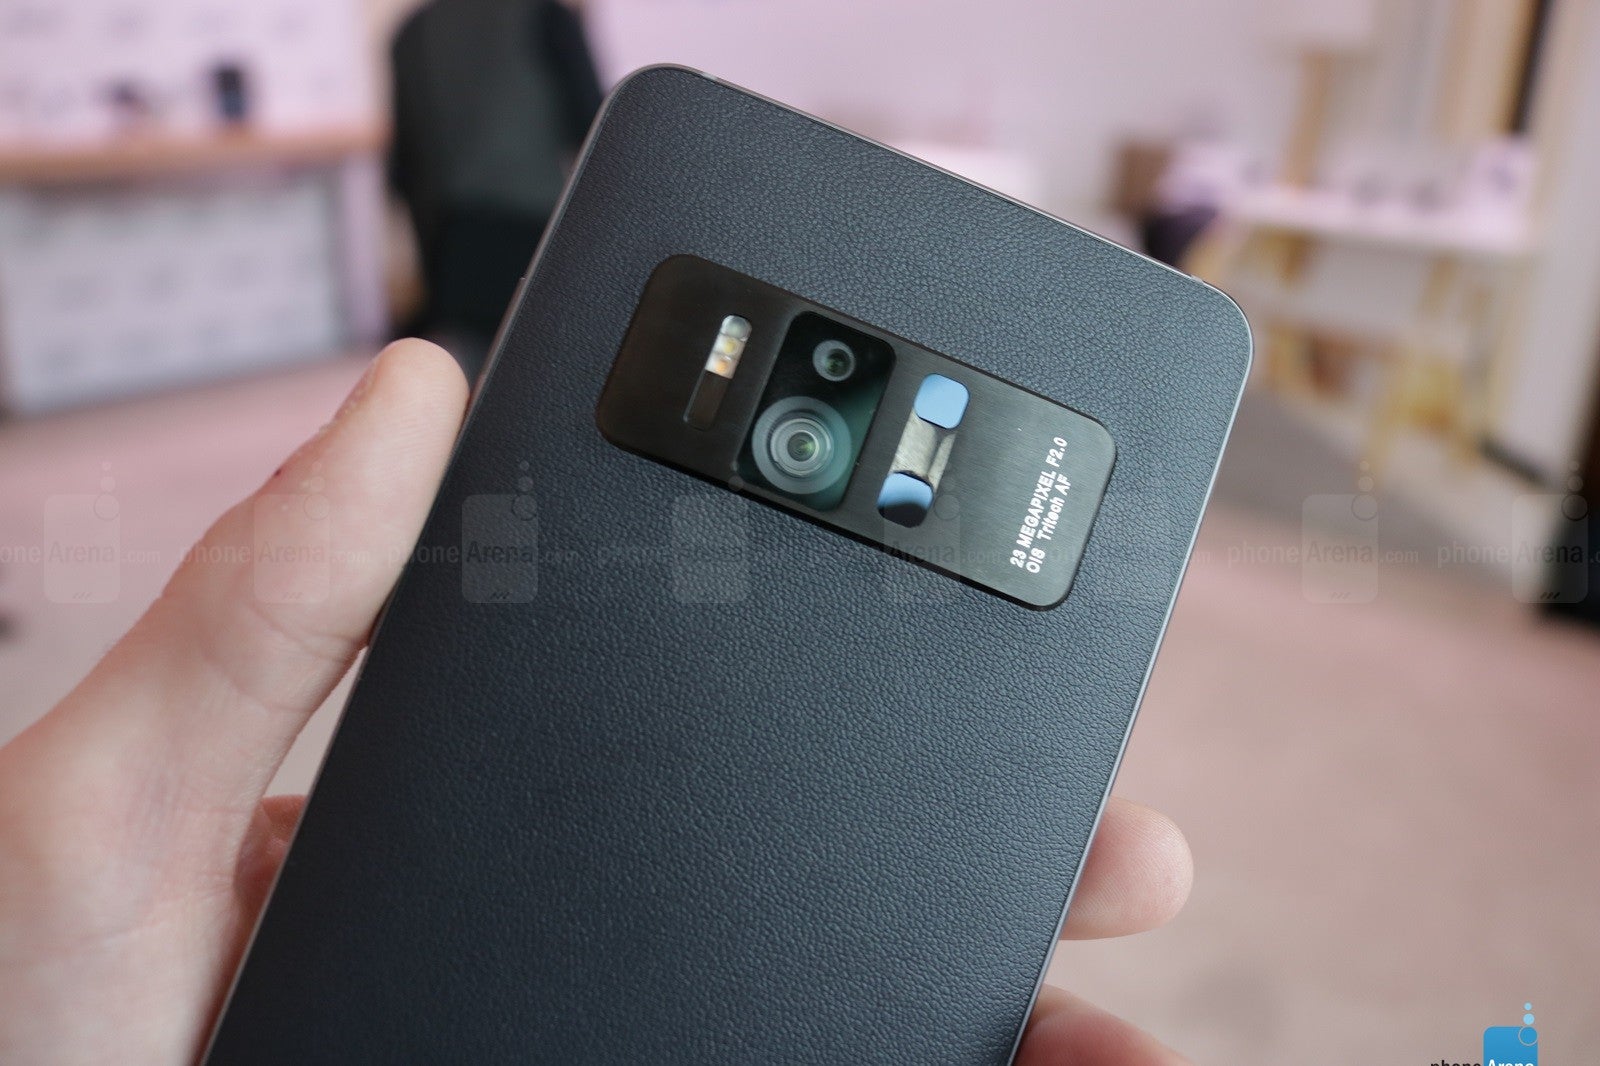 Hands-on look at the Asus ZenFone AR - augmented and virtual reality combined in one single handset